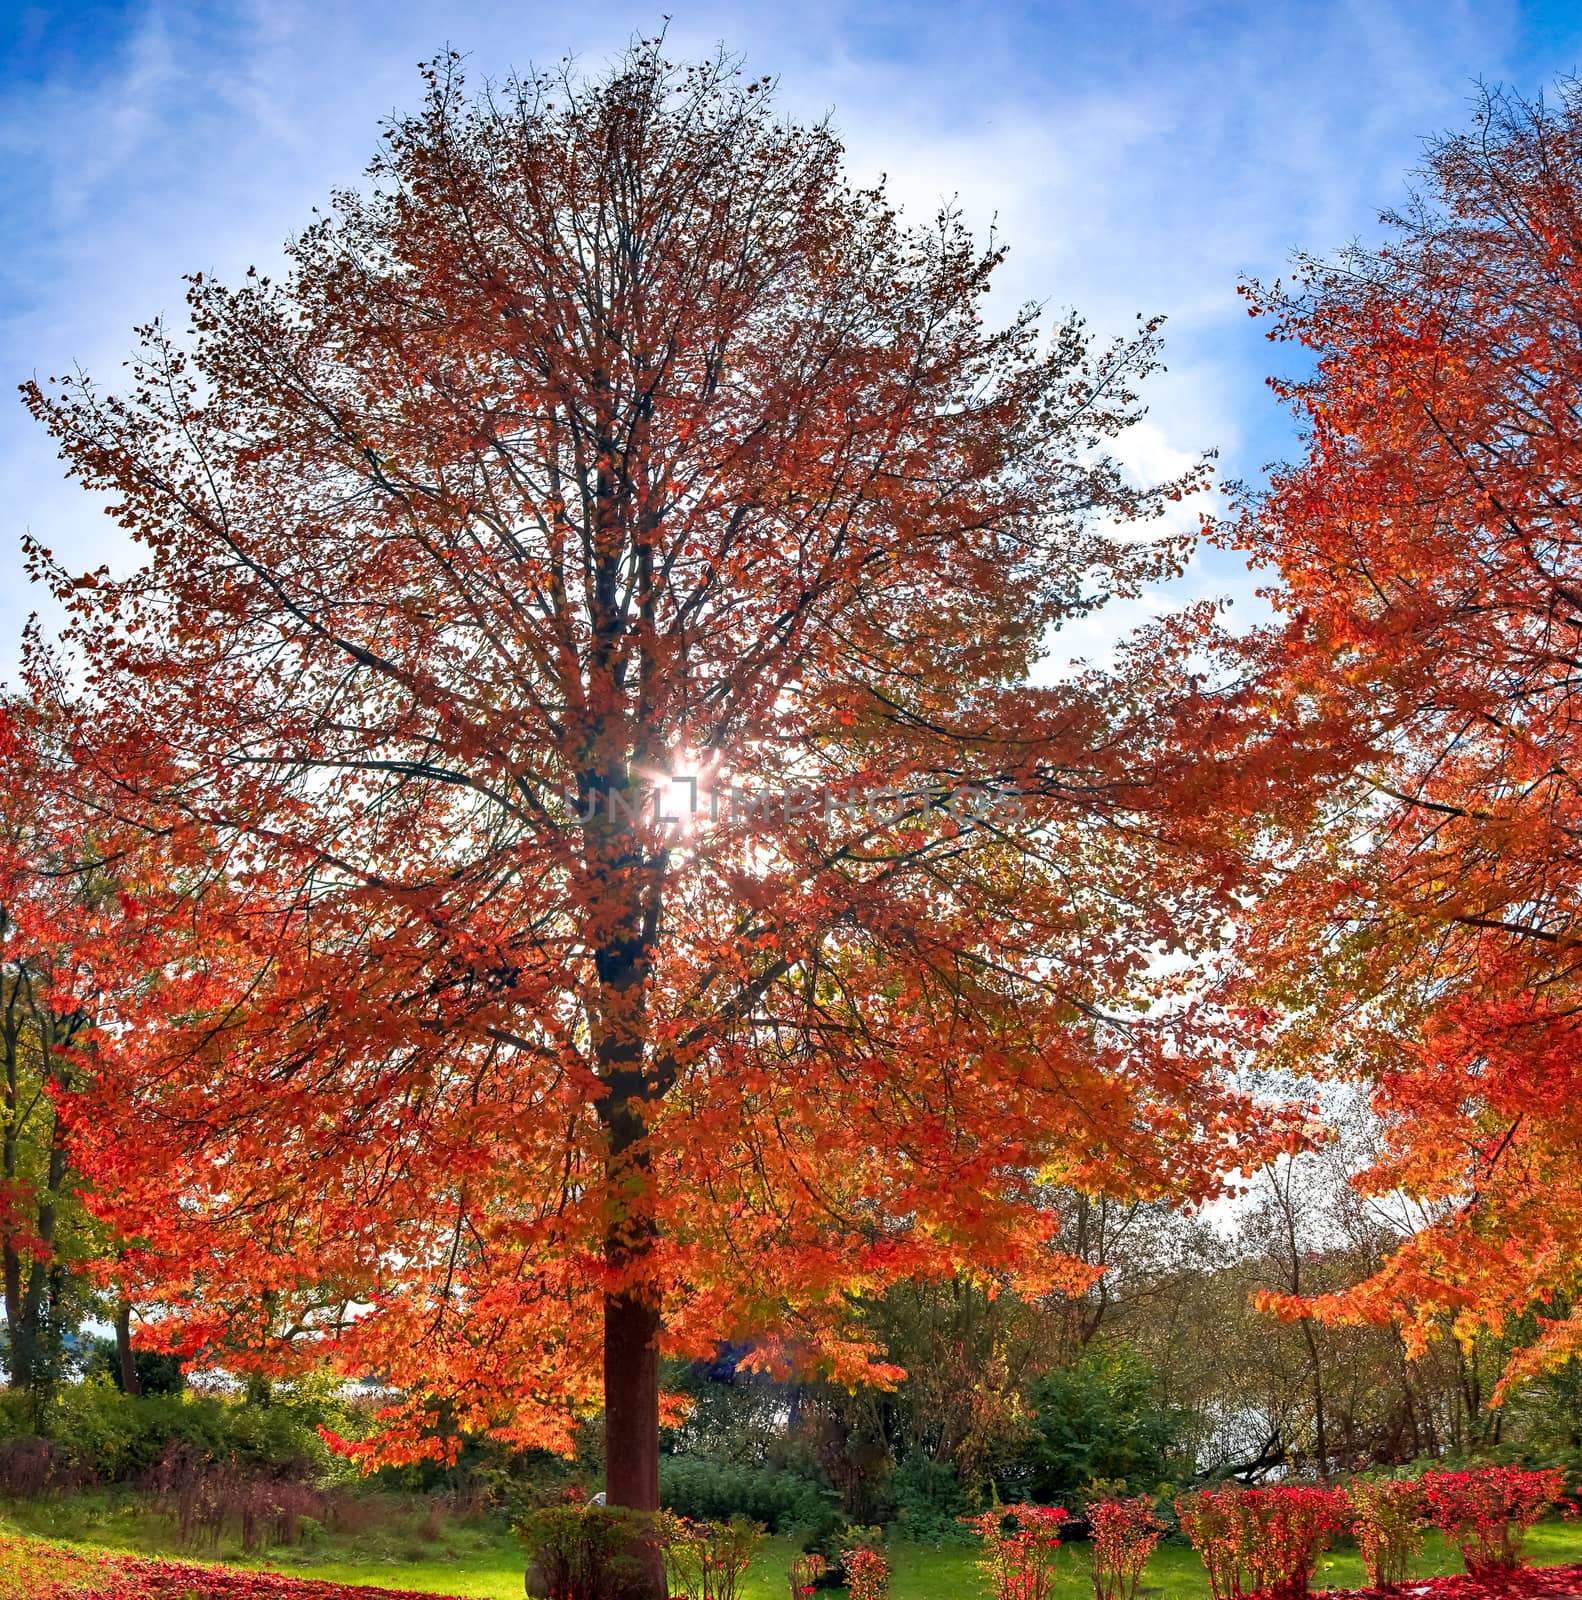 Beautiful autumn tree with orange and red colored leaves on a su by MP_foto71